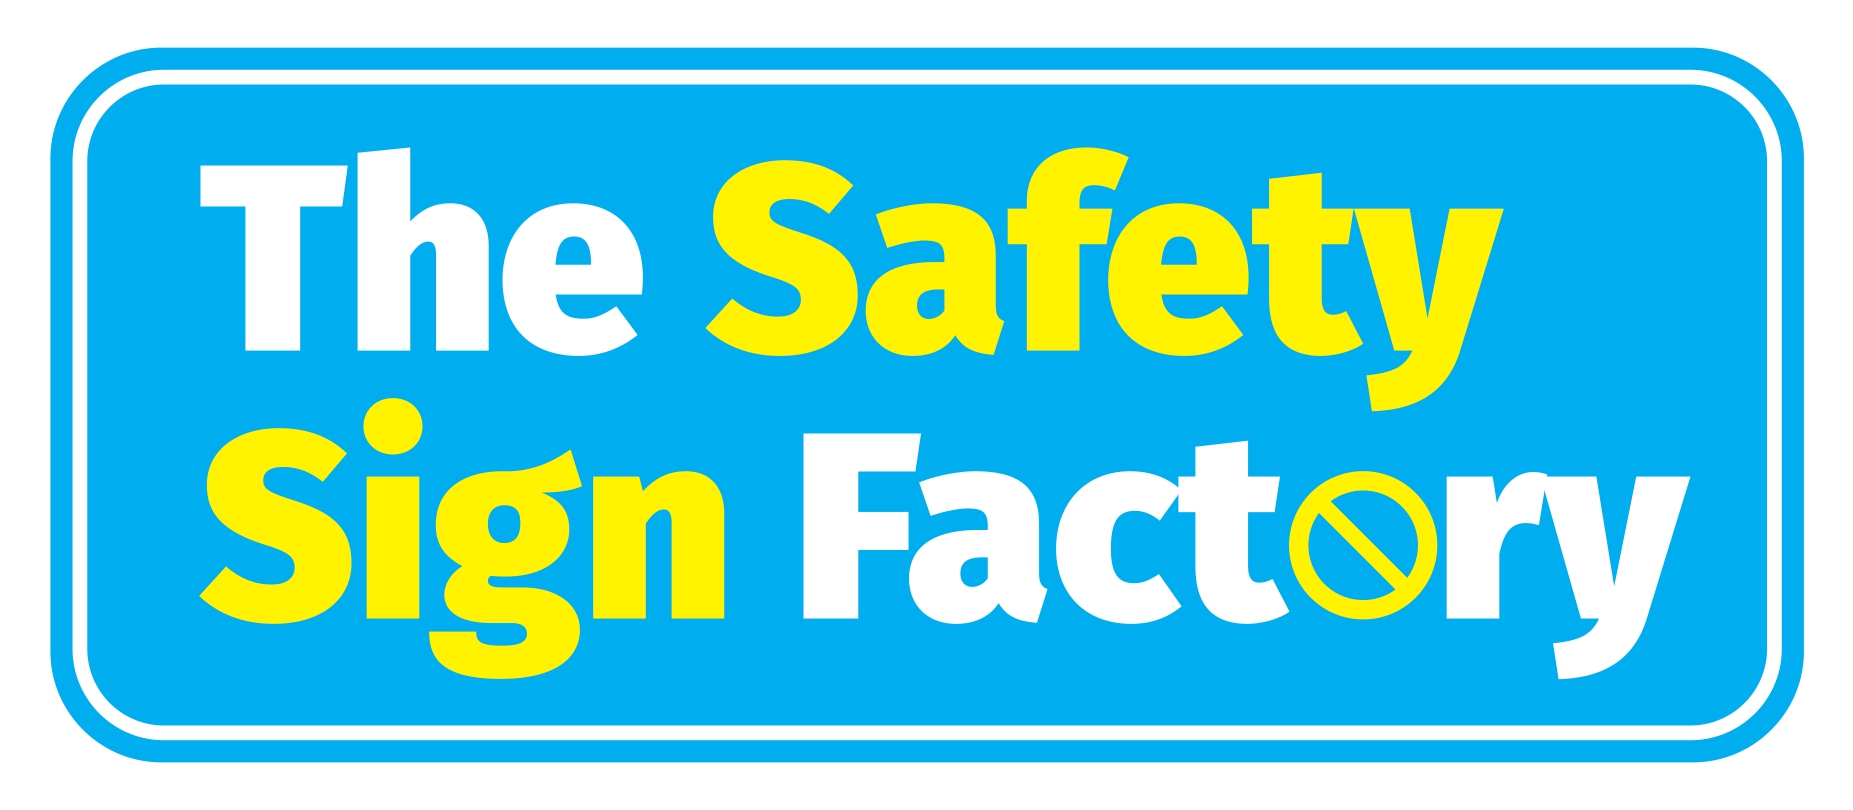 The Safety Sign Factory